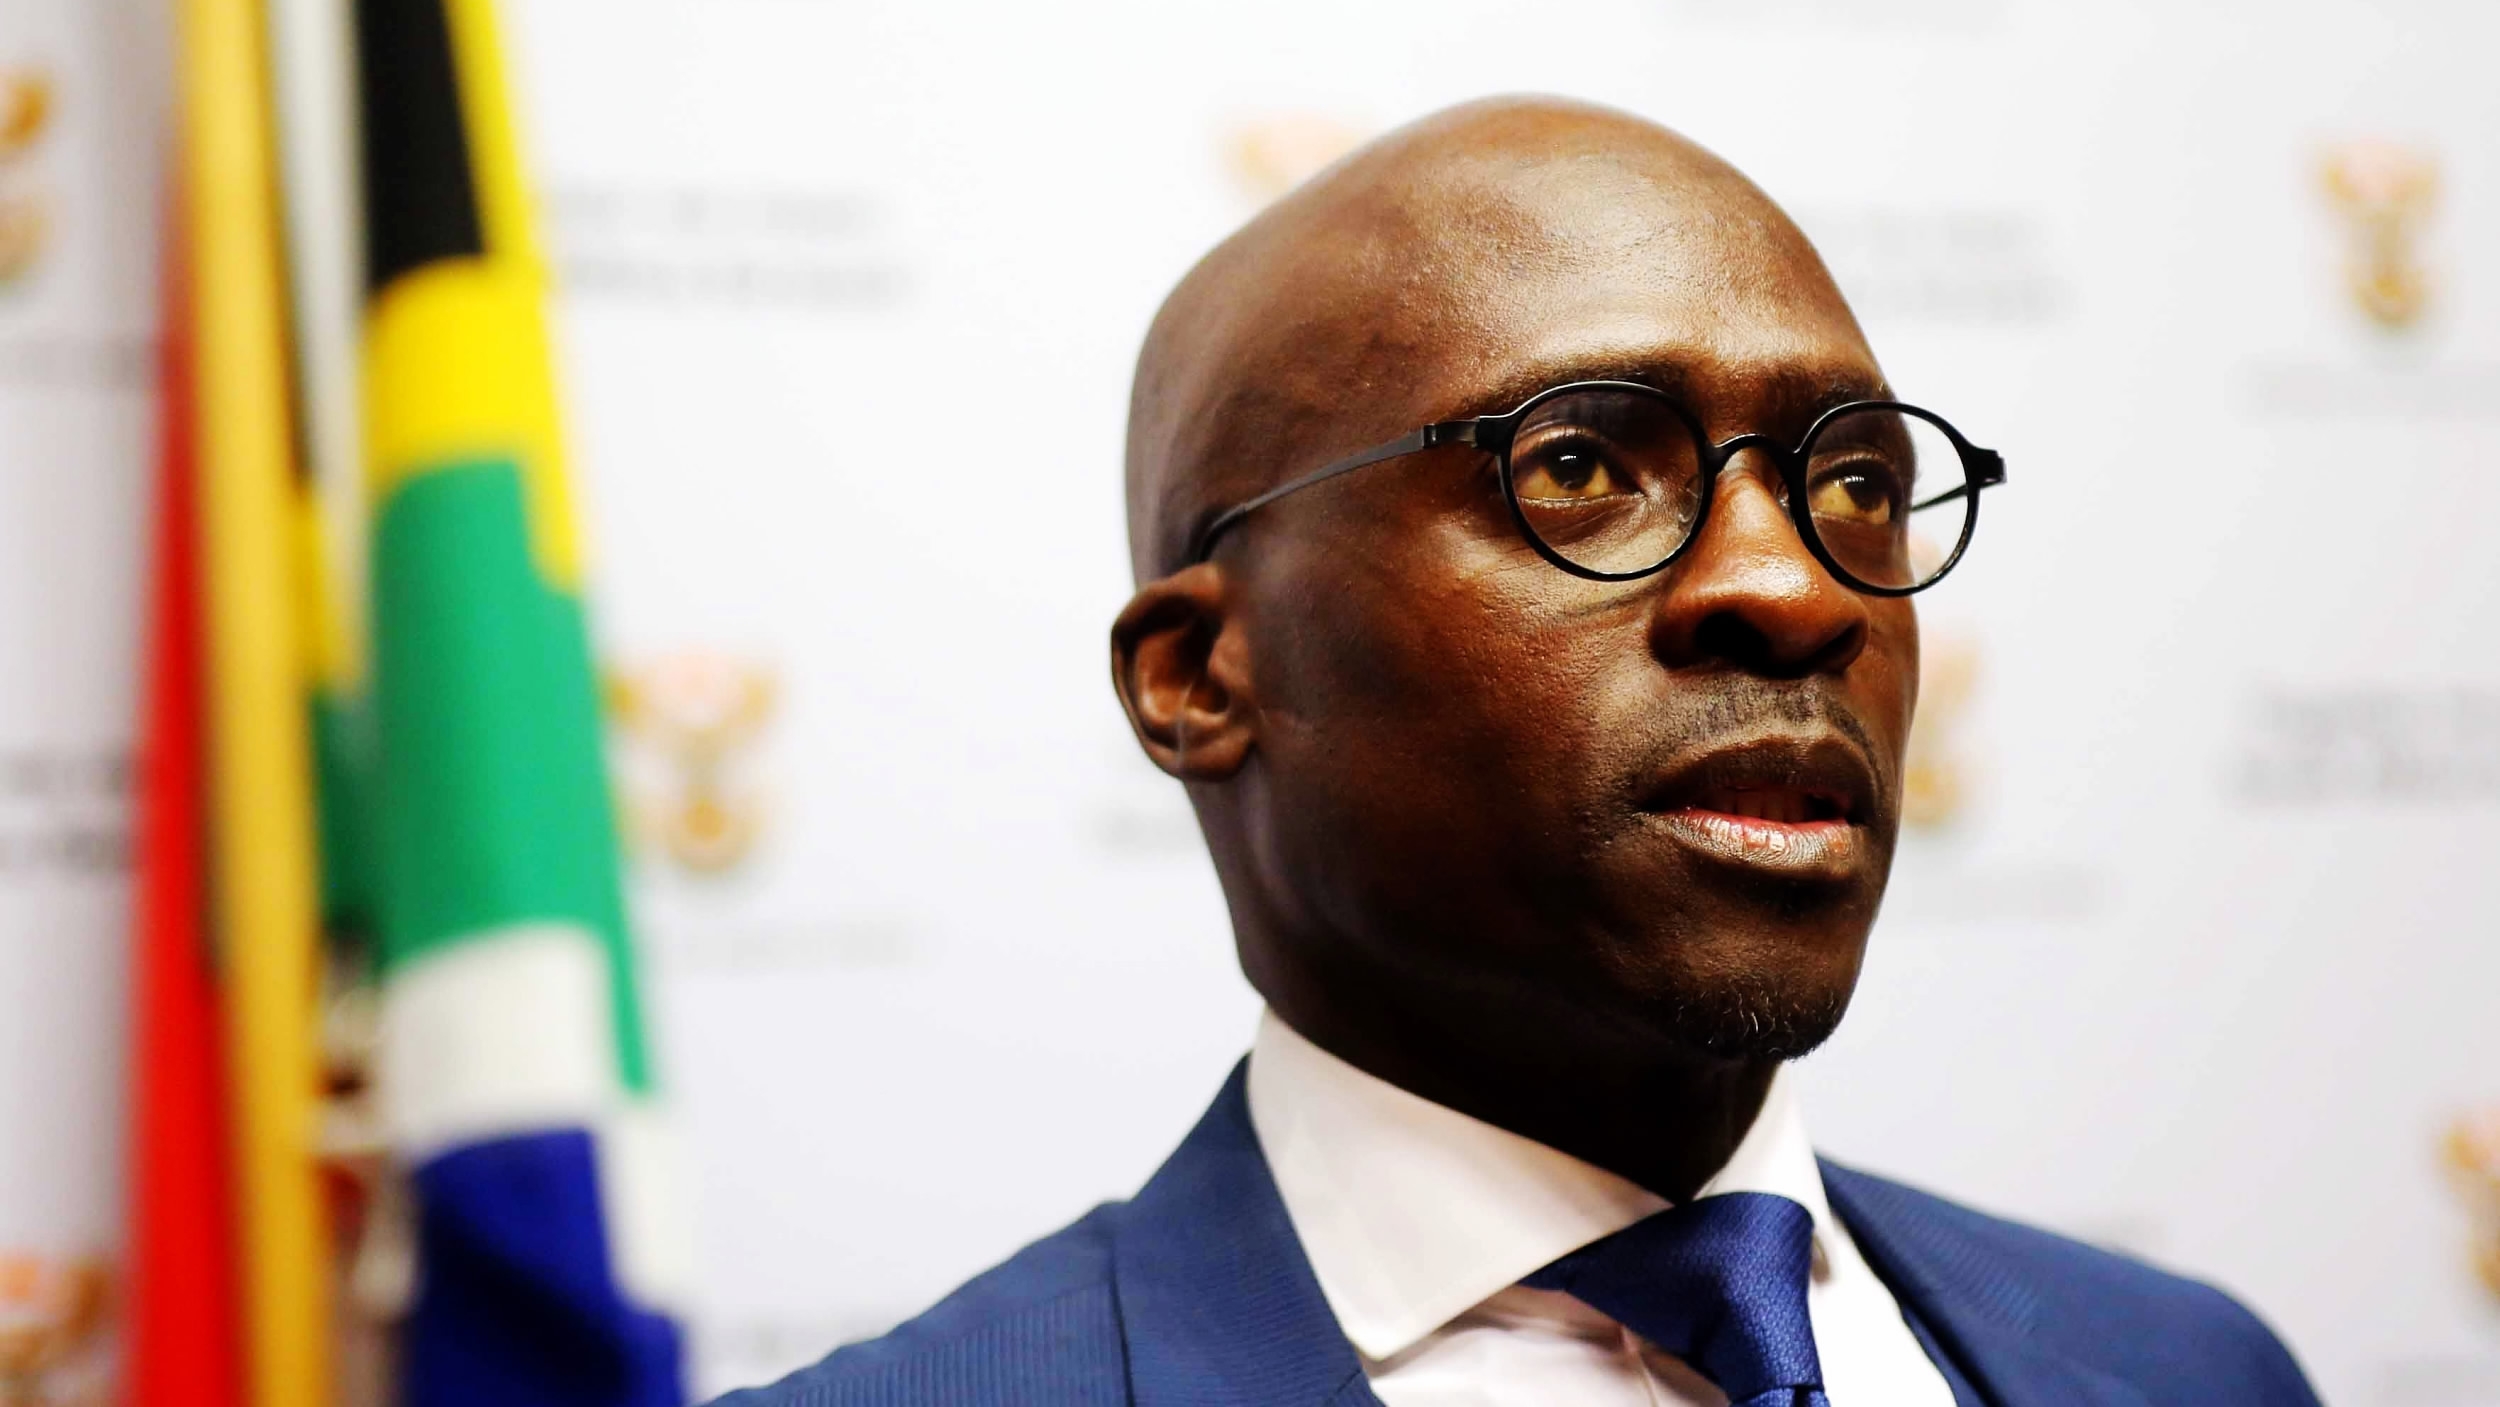 Malusi Gigaba And His Family : Public protector says 